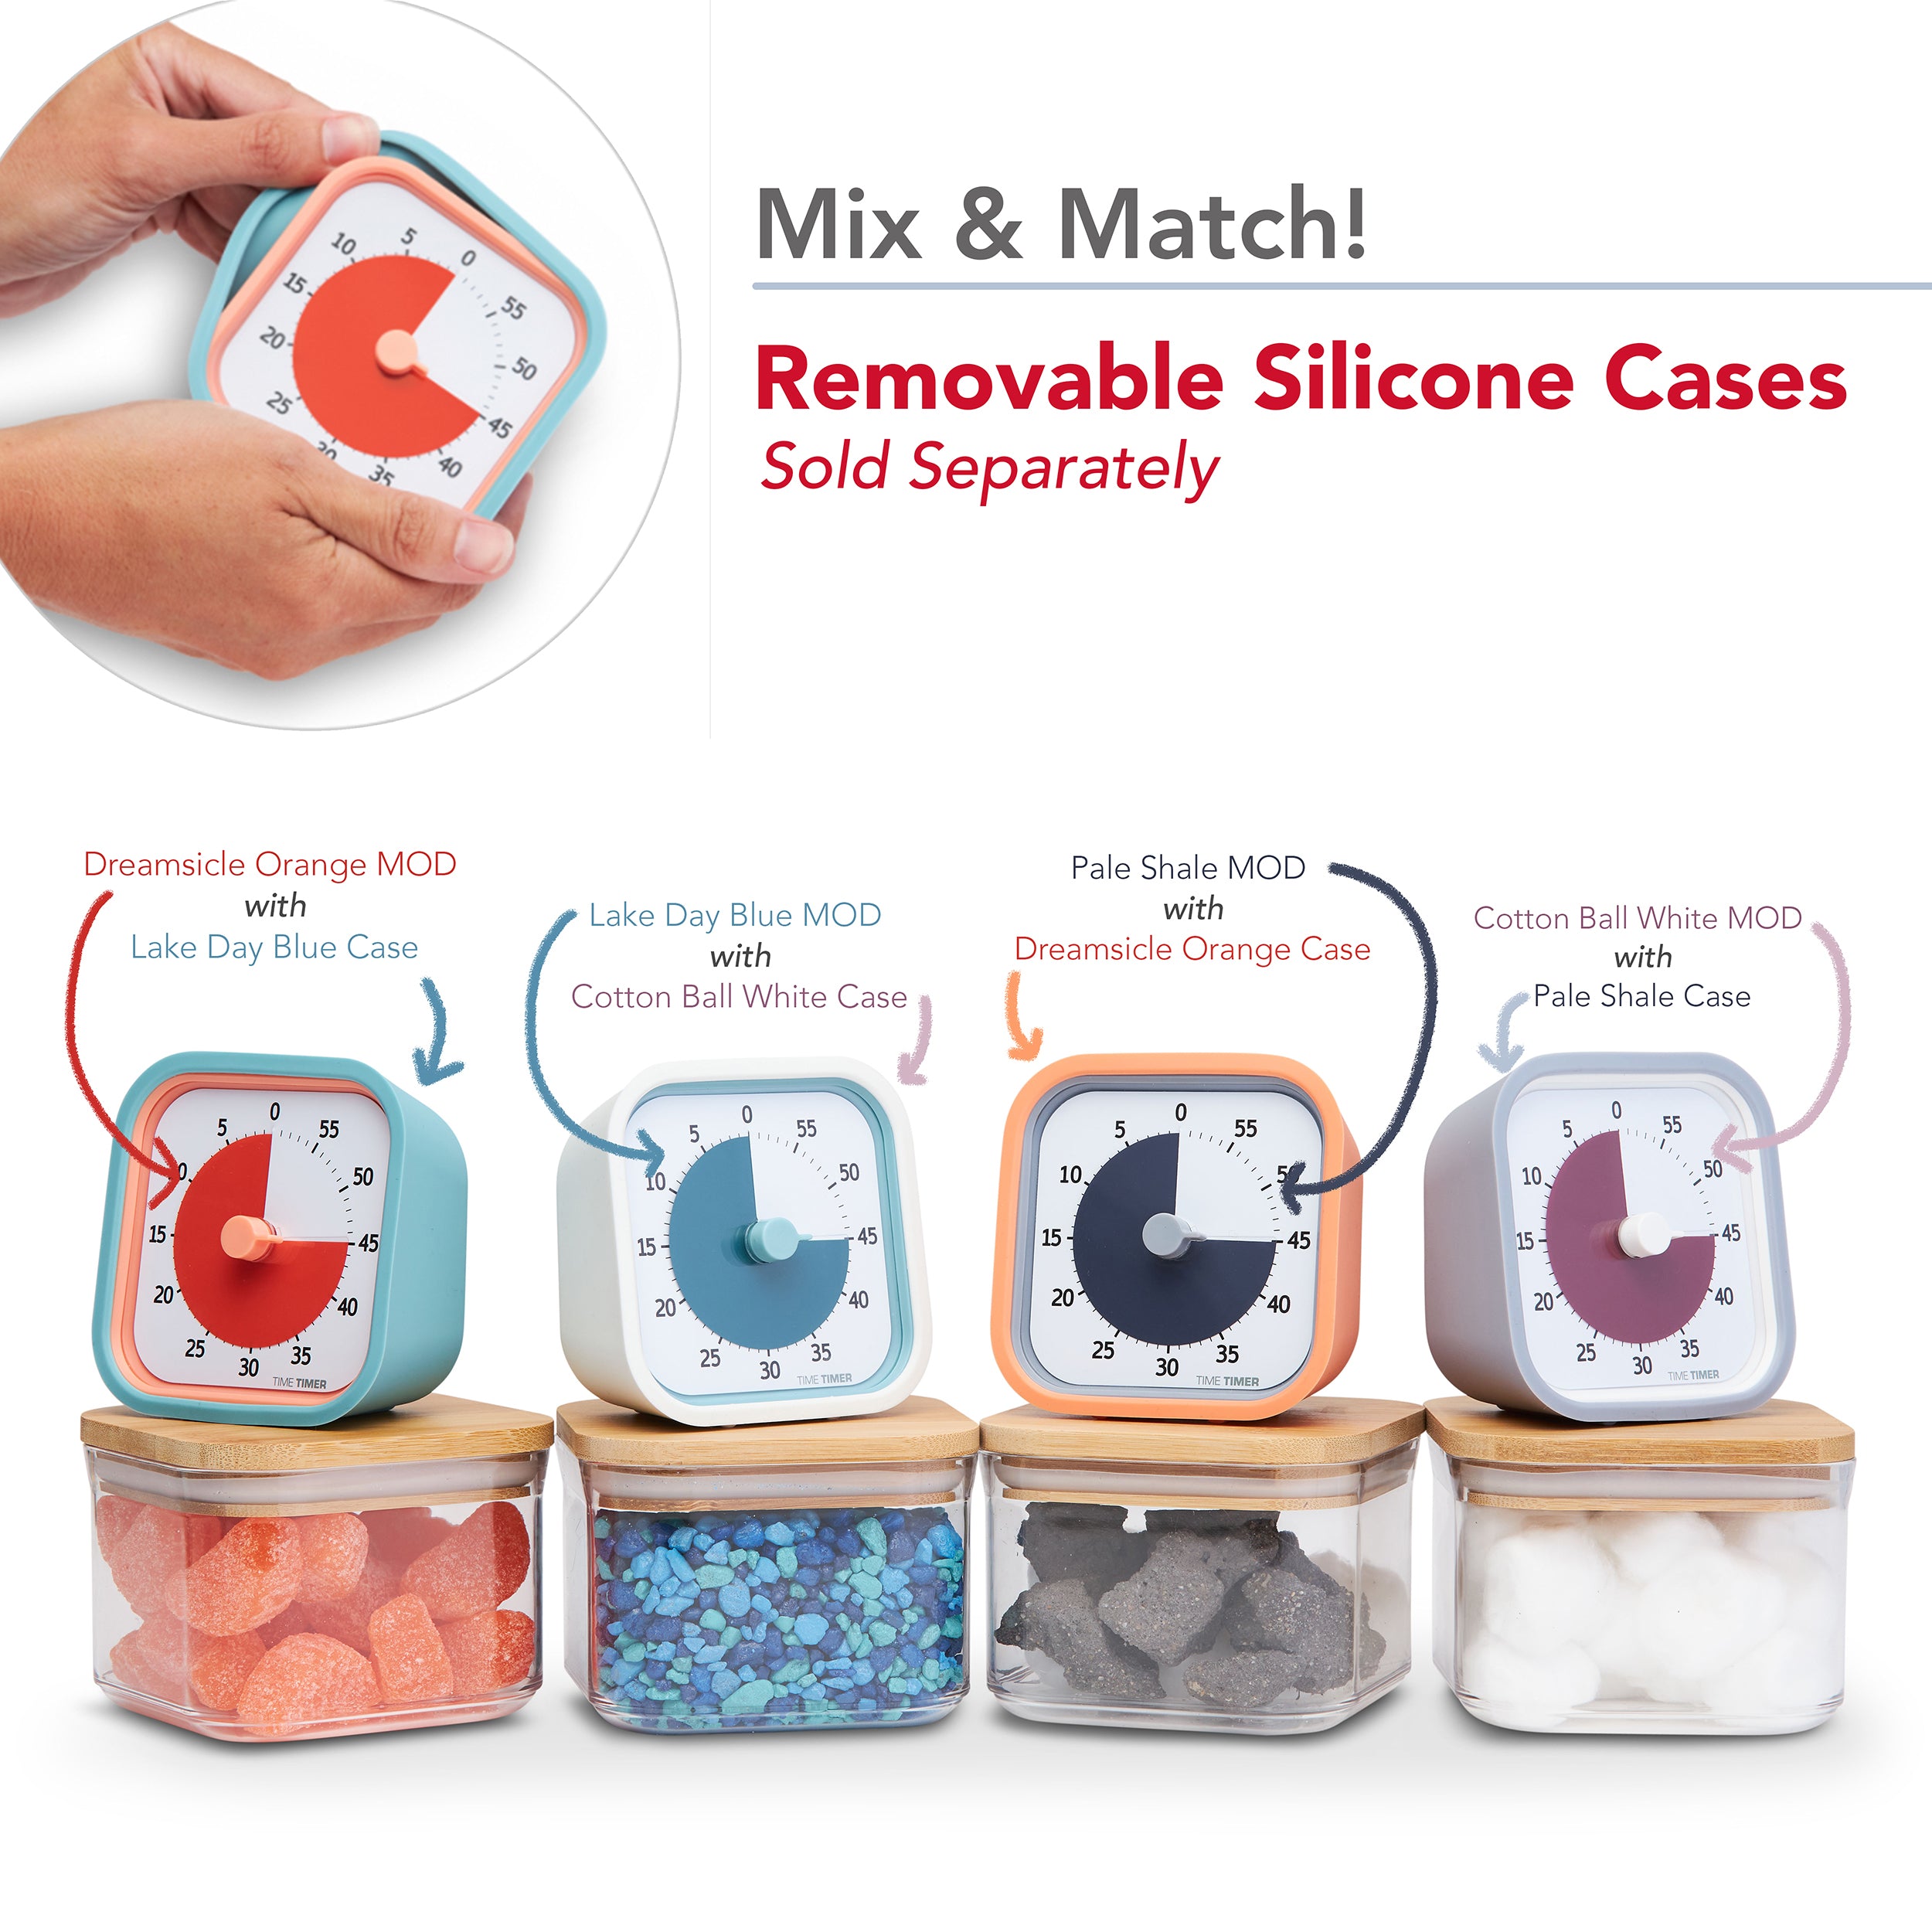 Mix & Match removable Silicone Cases 